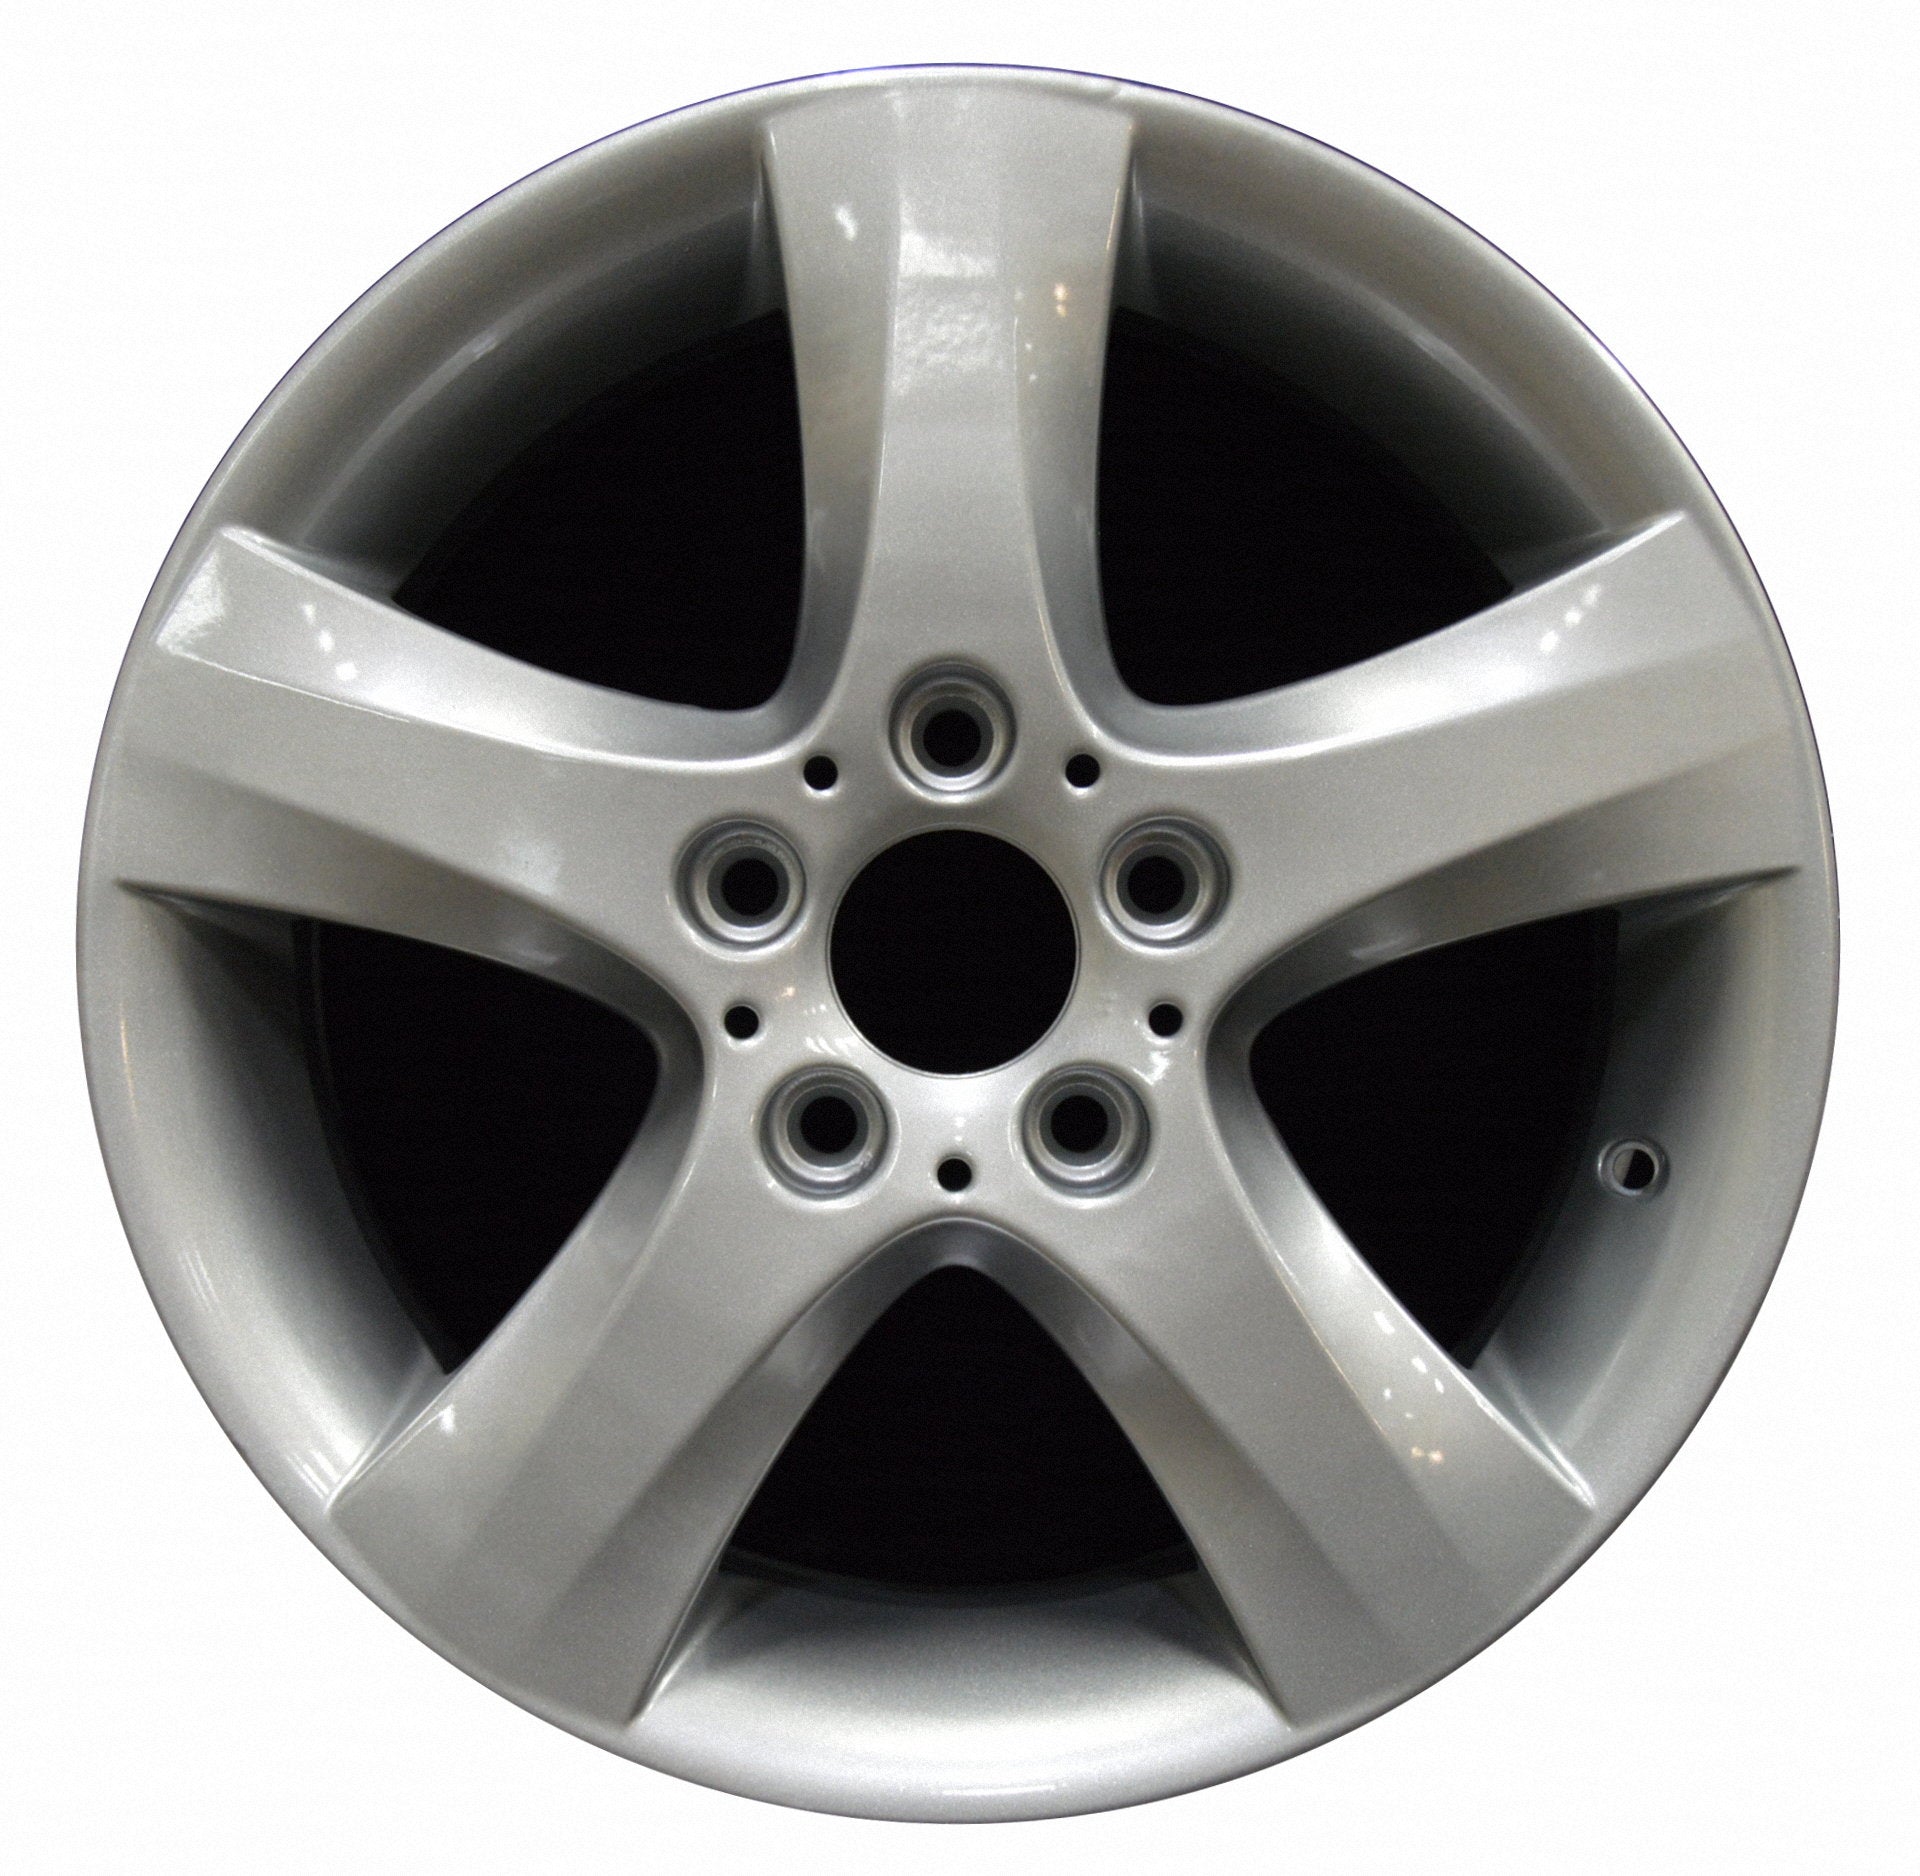 BMW 135i  2008, 2009, 2010, 2011, 2012, 2013 Factory OEM Car Wheel Size 17x7 Alloy WAO.71247FT.PS09.FF